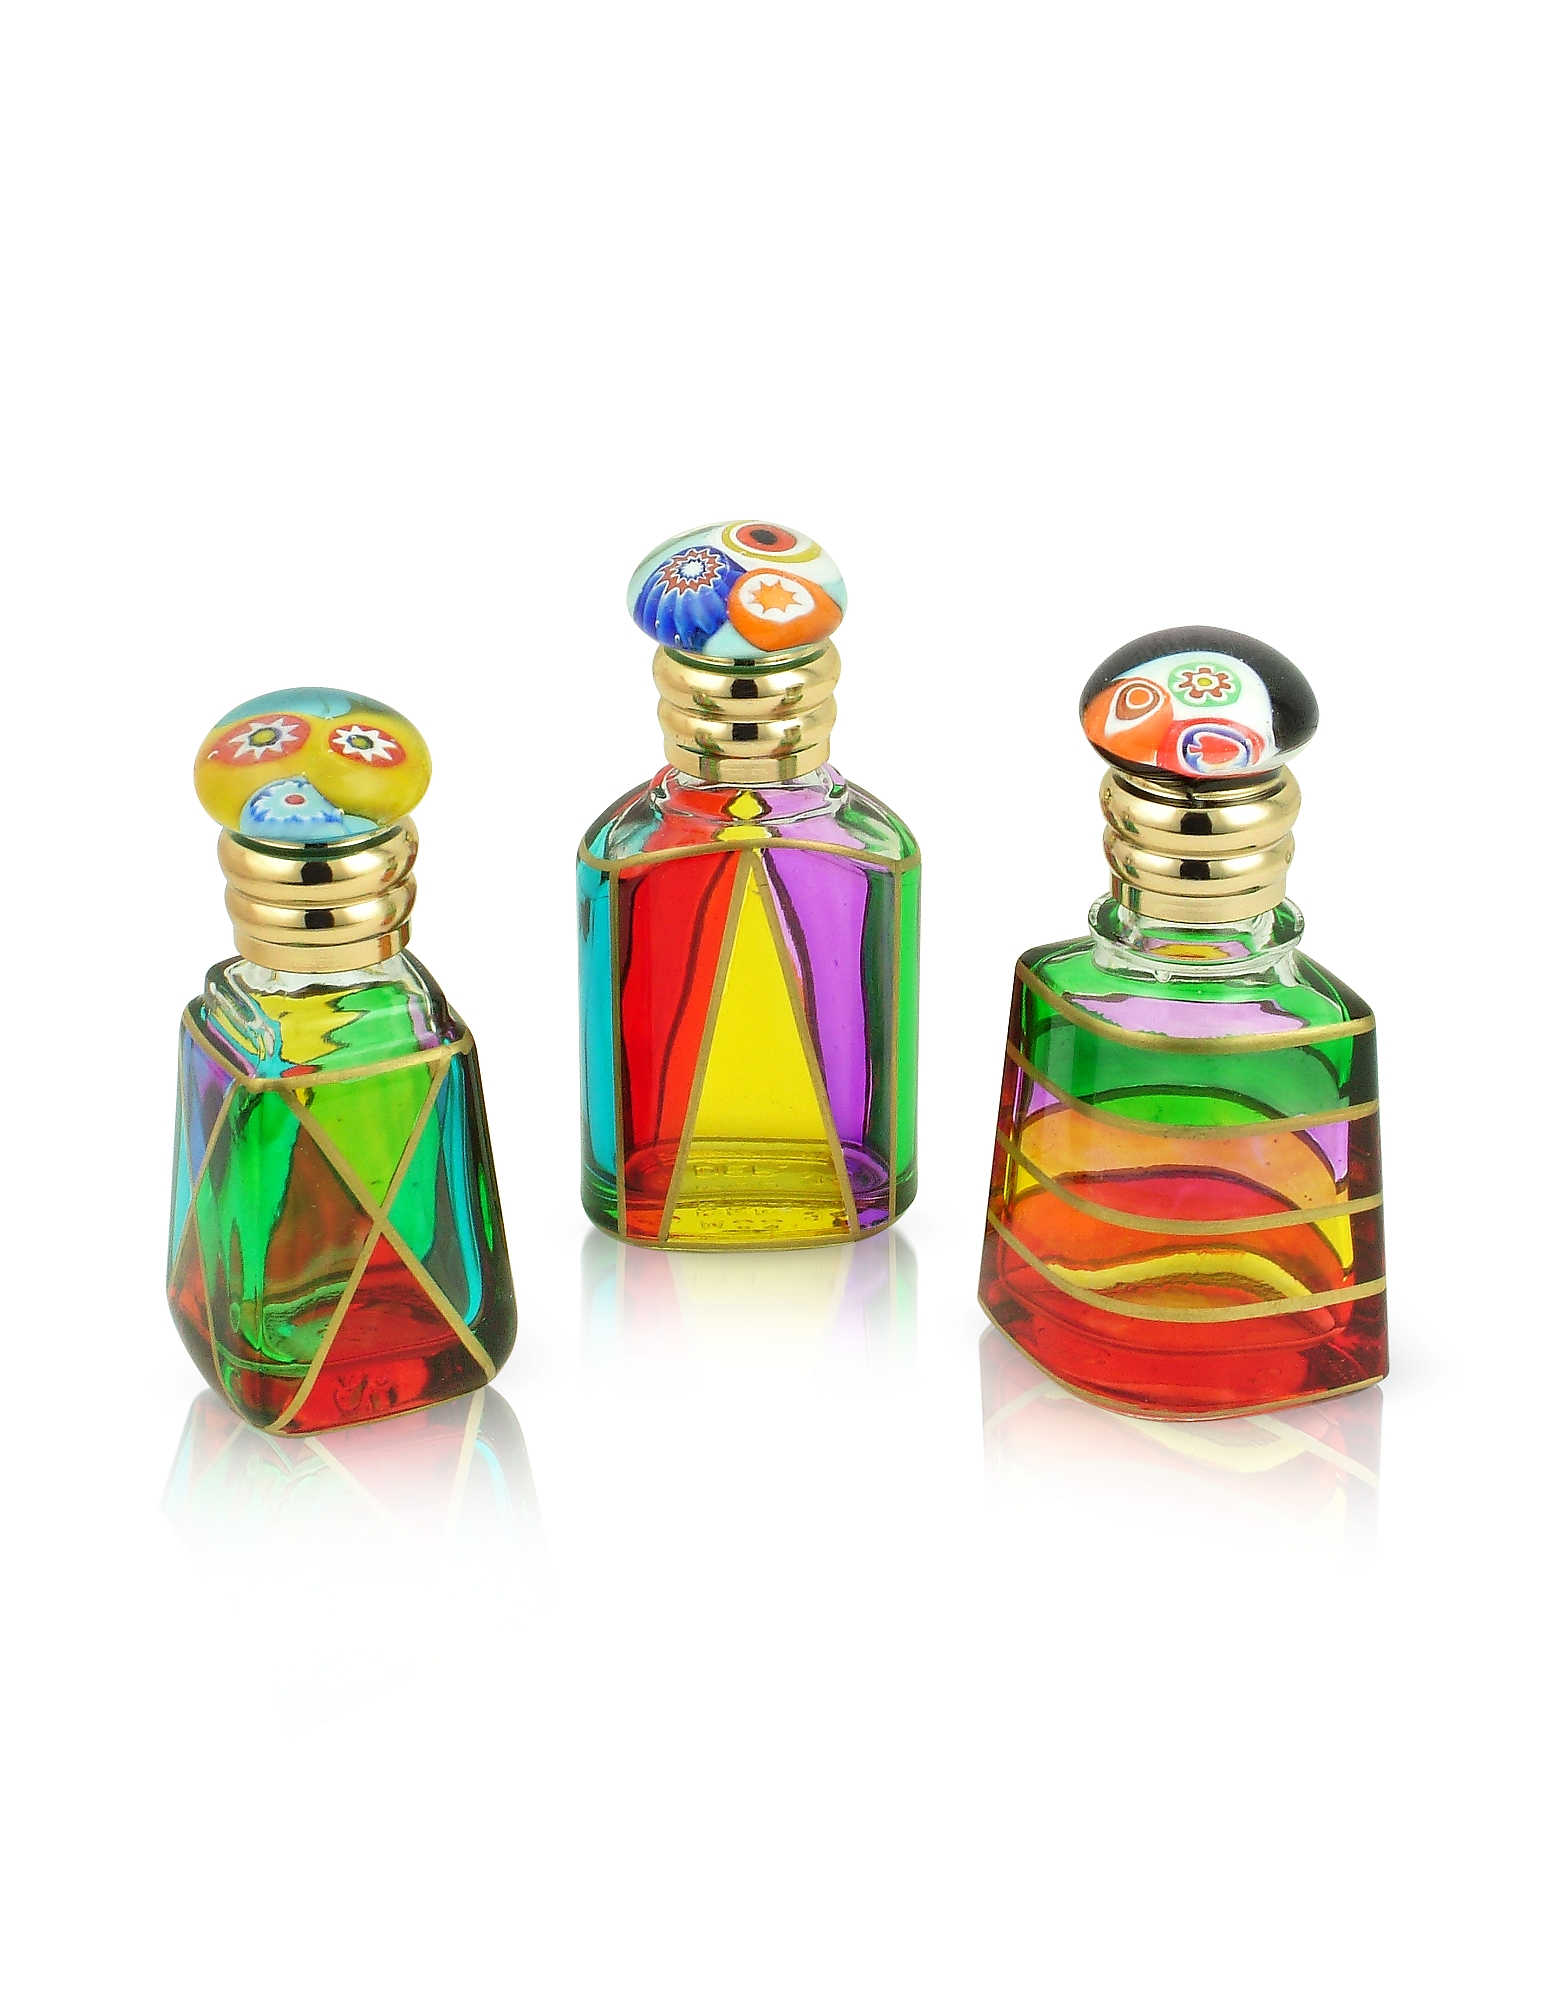 

Marco Polo - Hand Decorated Murano Glass Murrina-Capped Perfume Bottles, Multicolor